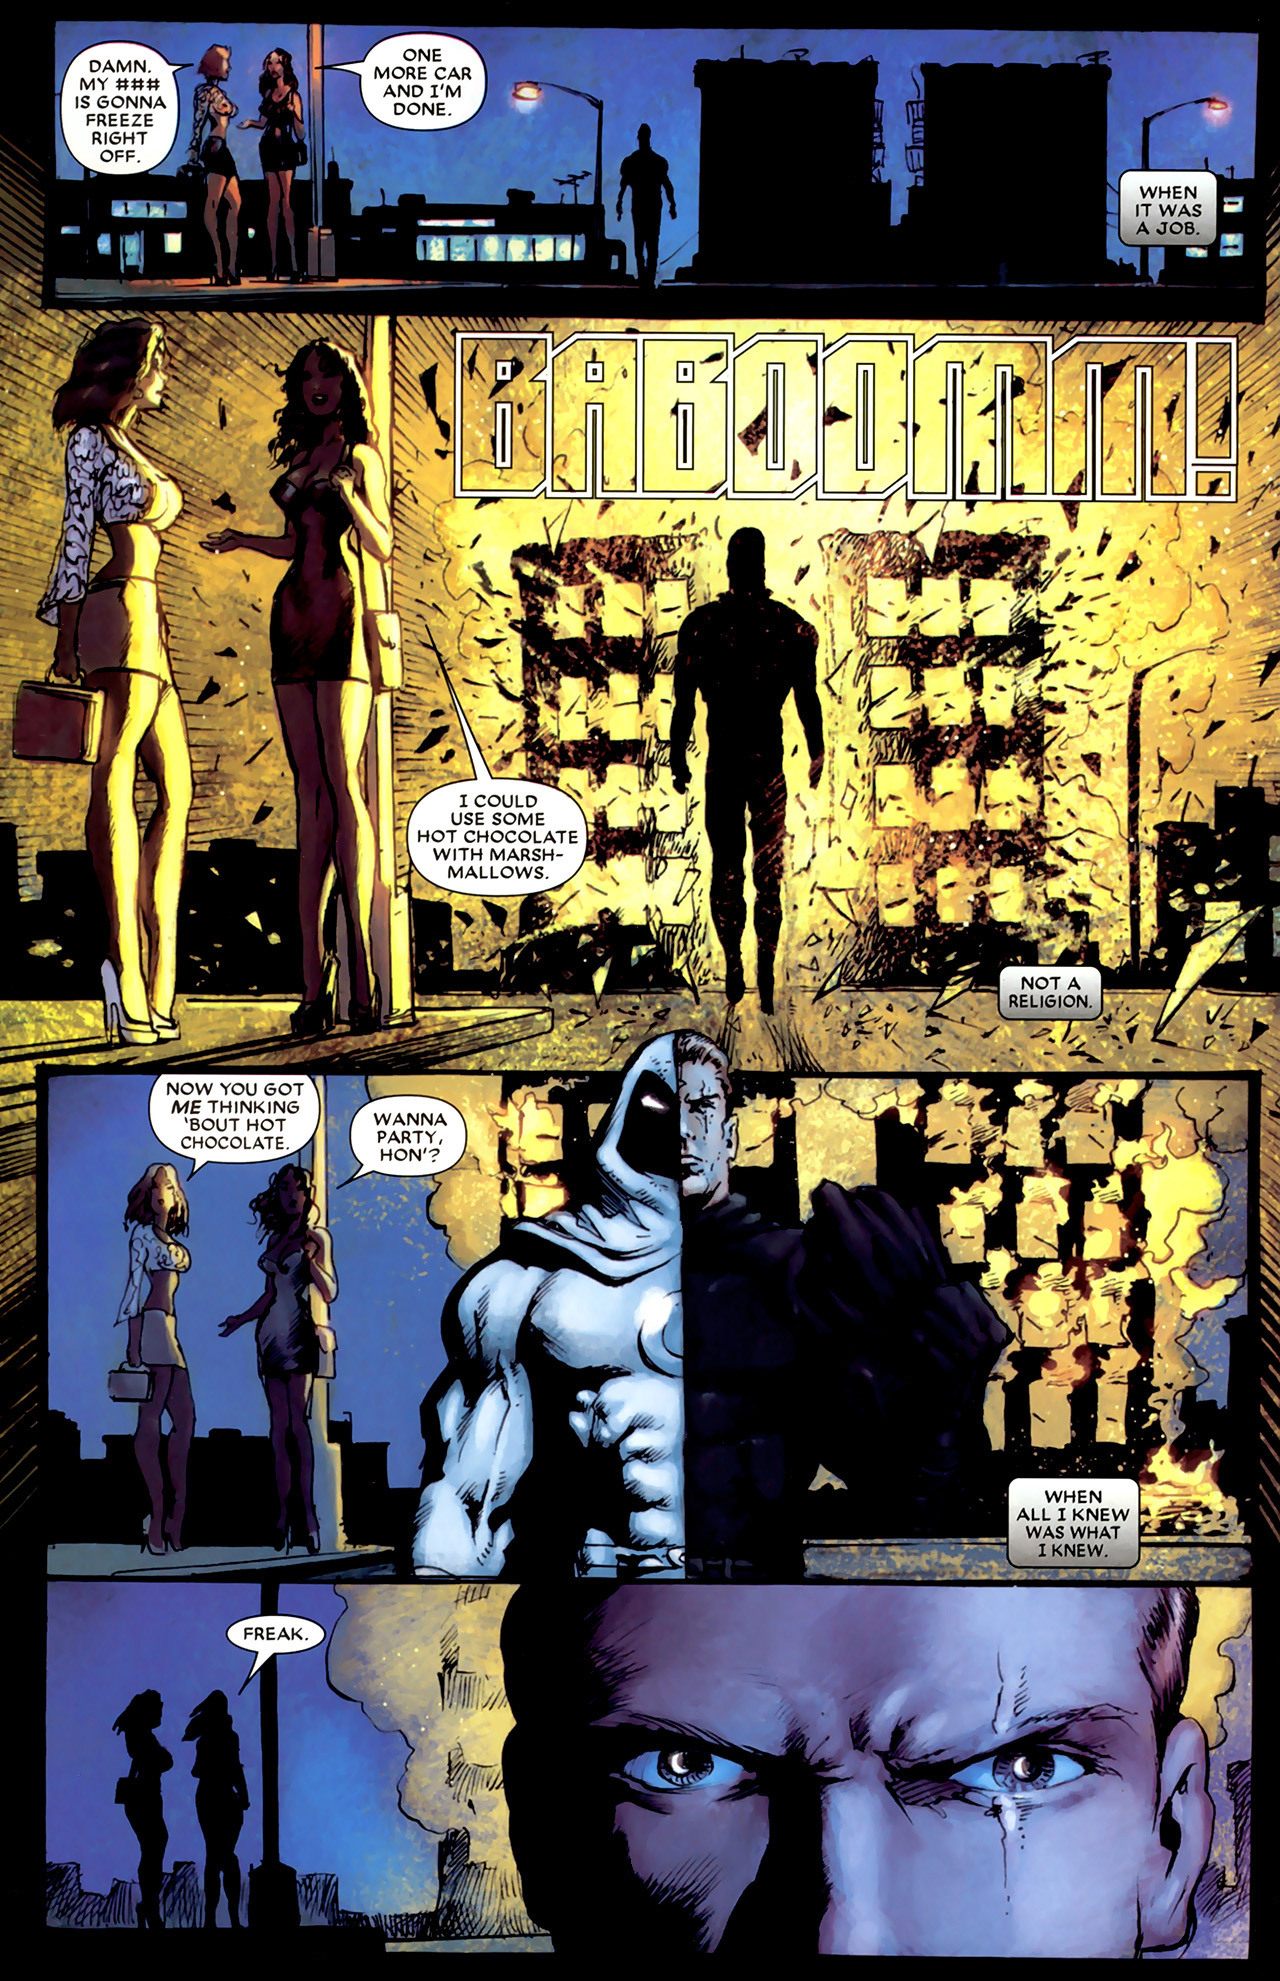 Moon Knight #21 - The Death of Marc Spector, Part 1